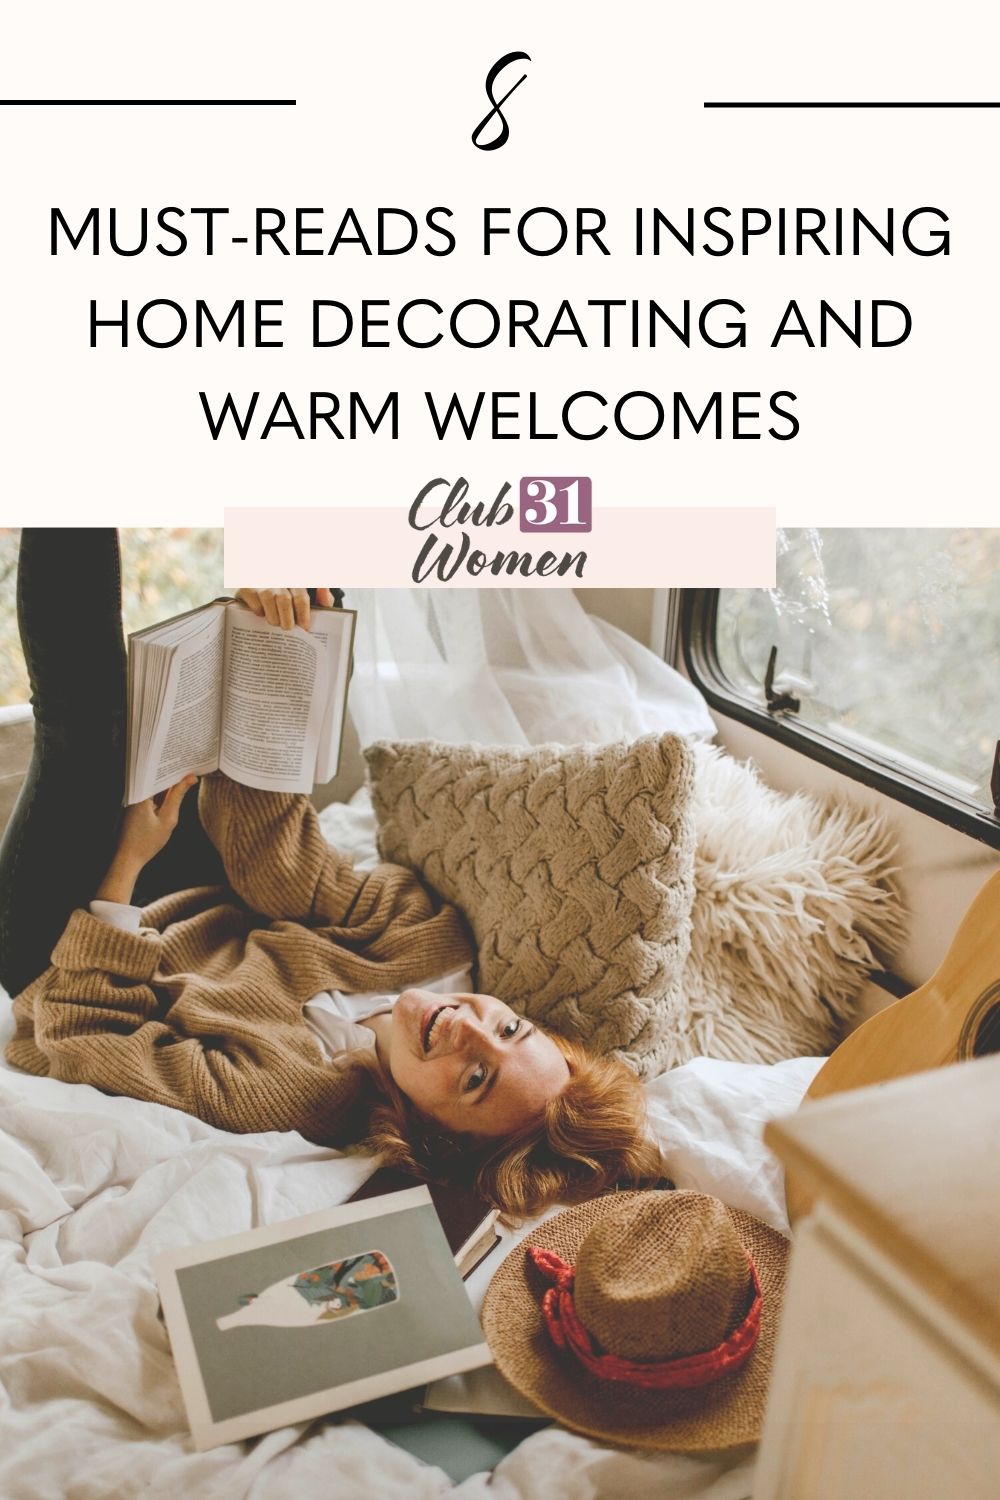 How can you make your home a place of hospitality for those living in it and those who come through it? We got ya covered! via @Club31Women